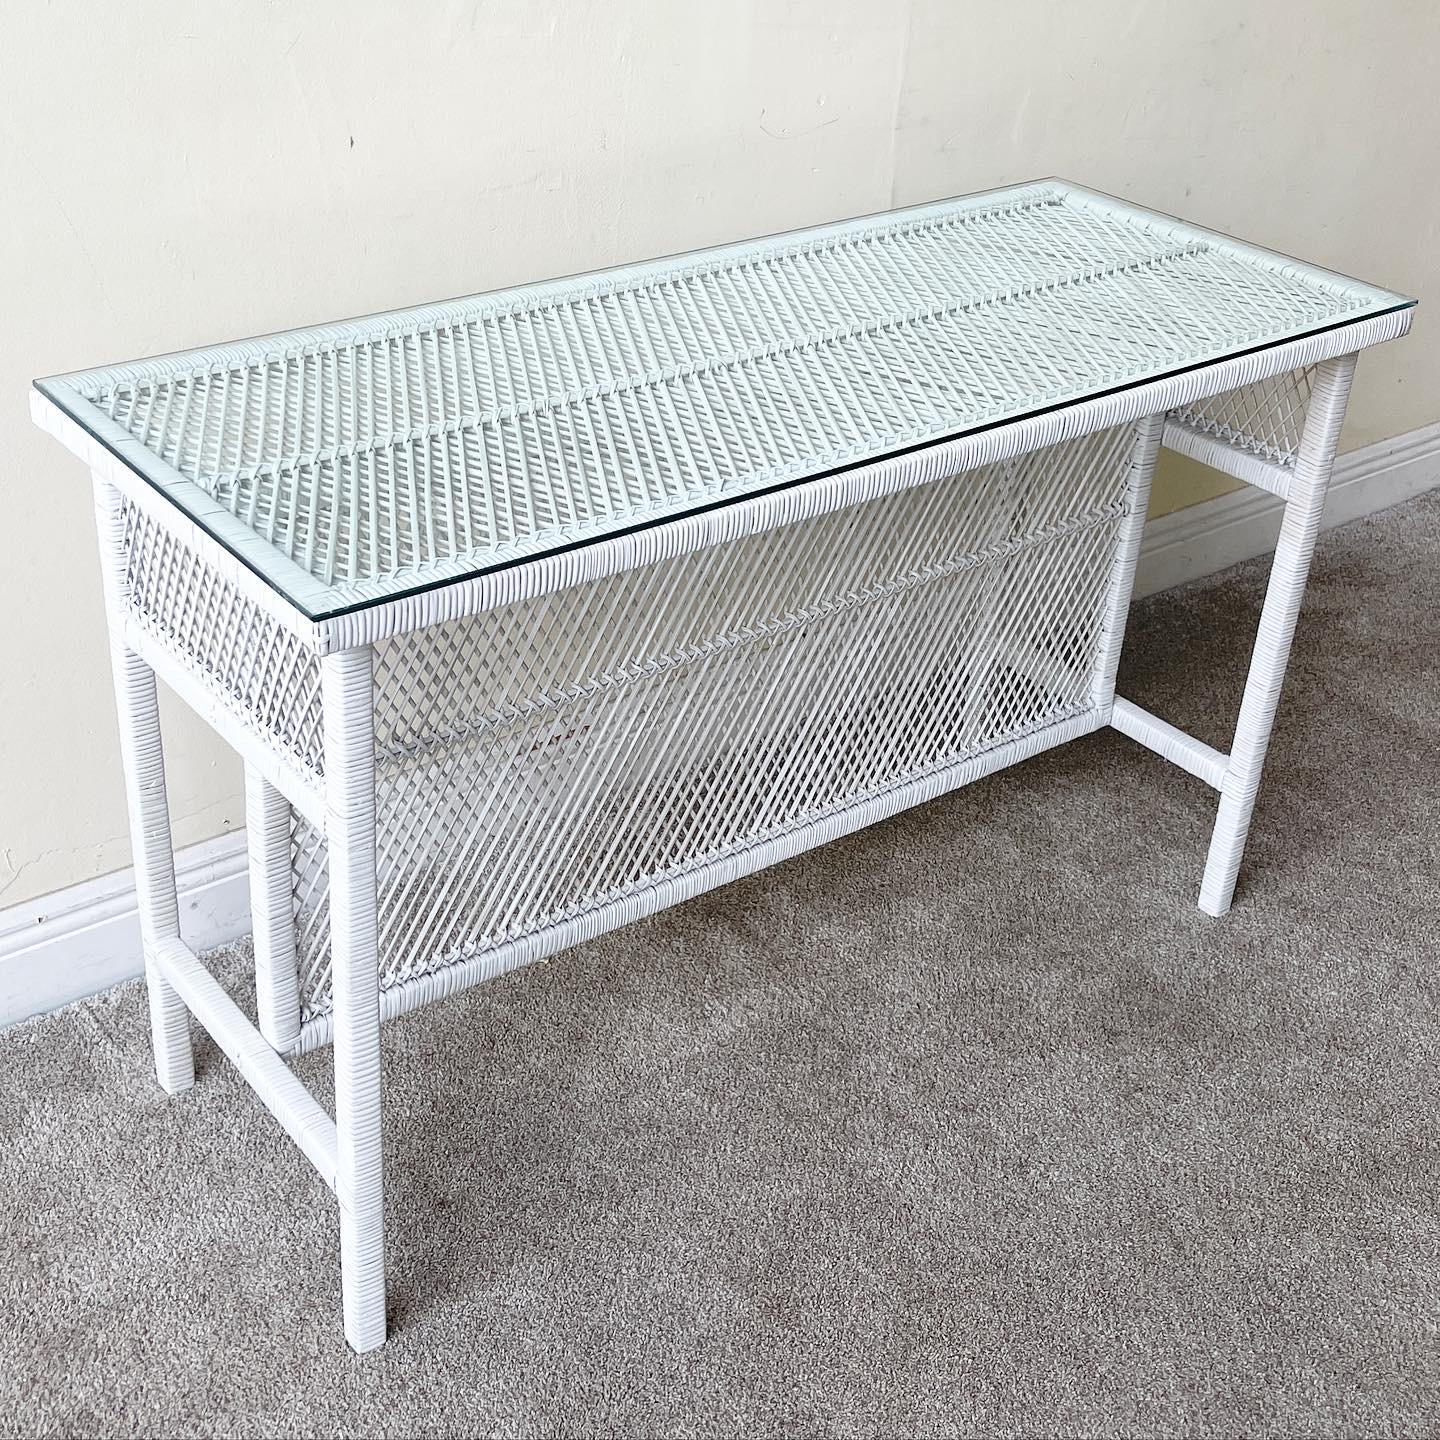 Late 20th Century Boho Chic White Rattan Console Table With Glass Top